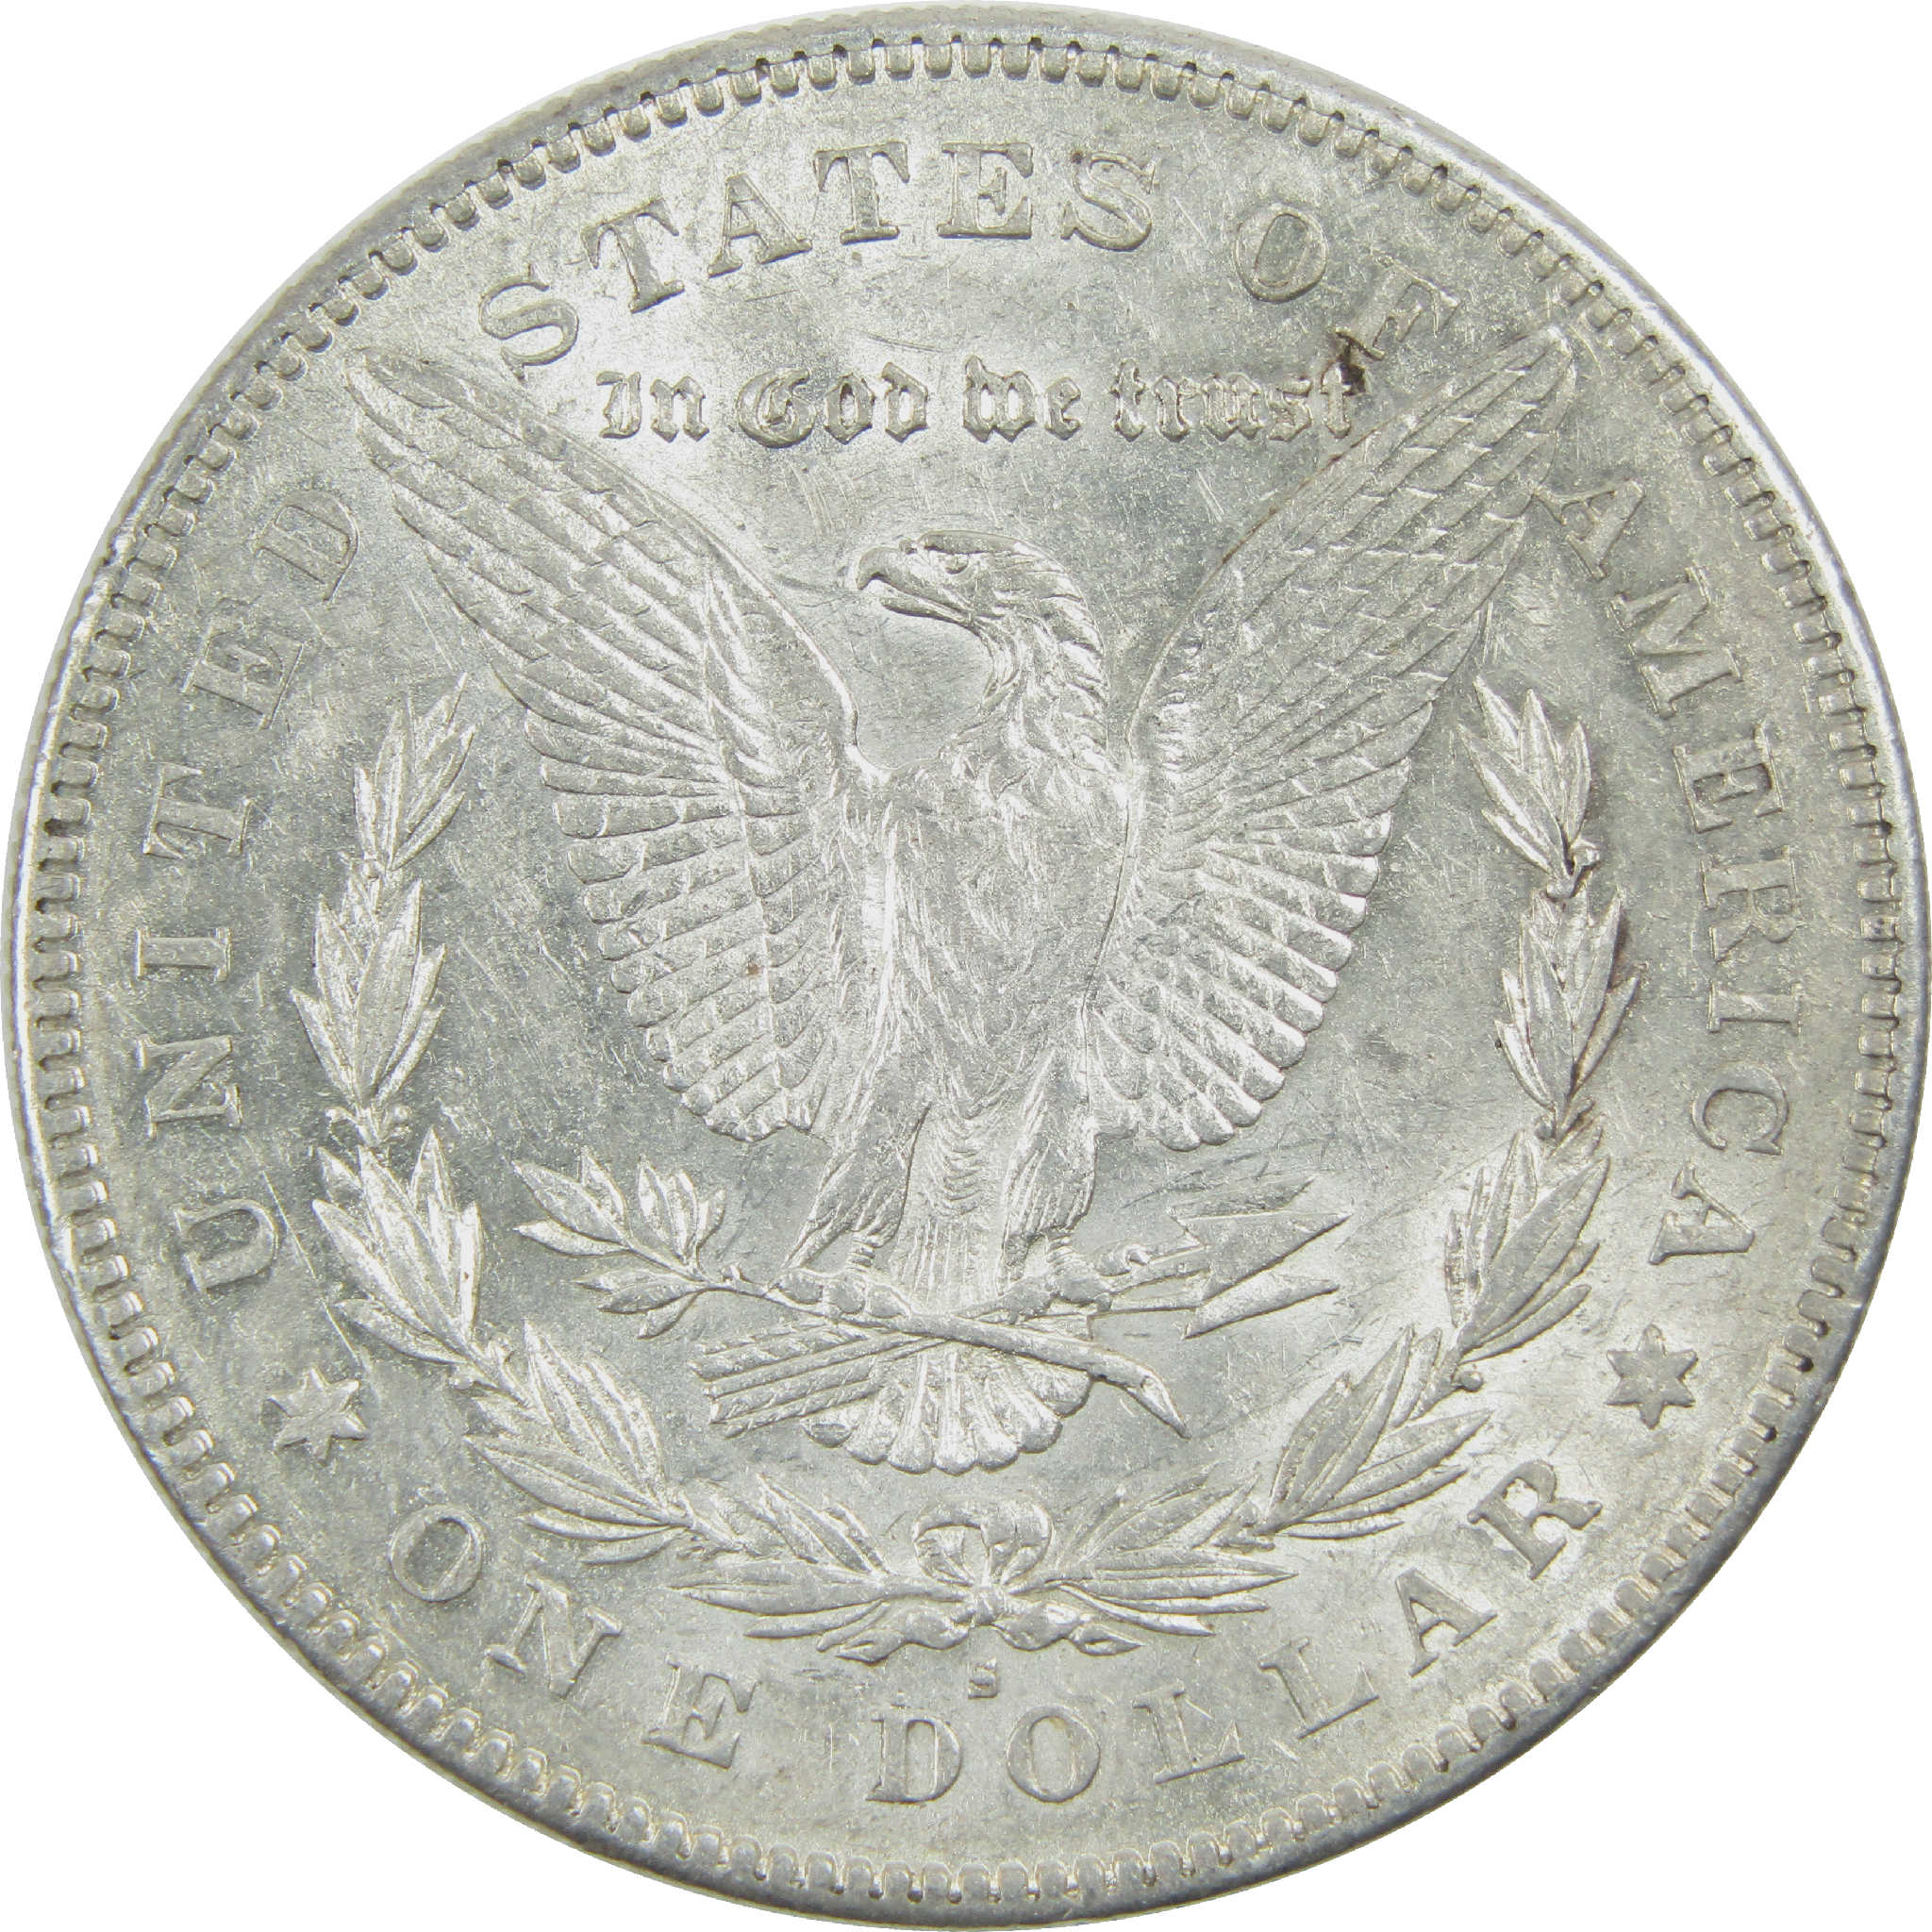 1879 S Rev 78 Morgan Dollar AU About Uncirculated Silver SKU:I13598 - Morgan coin - Morgan silver dollar - Morgan silver dollar for sale - Profile Coins &amp; Collectibles